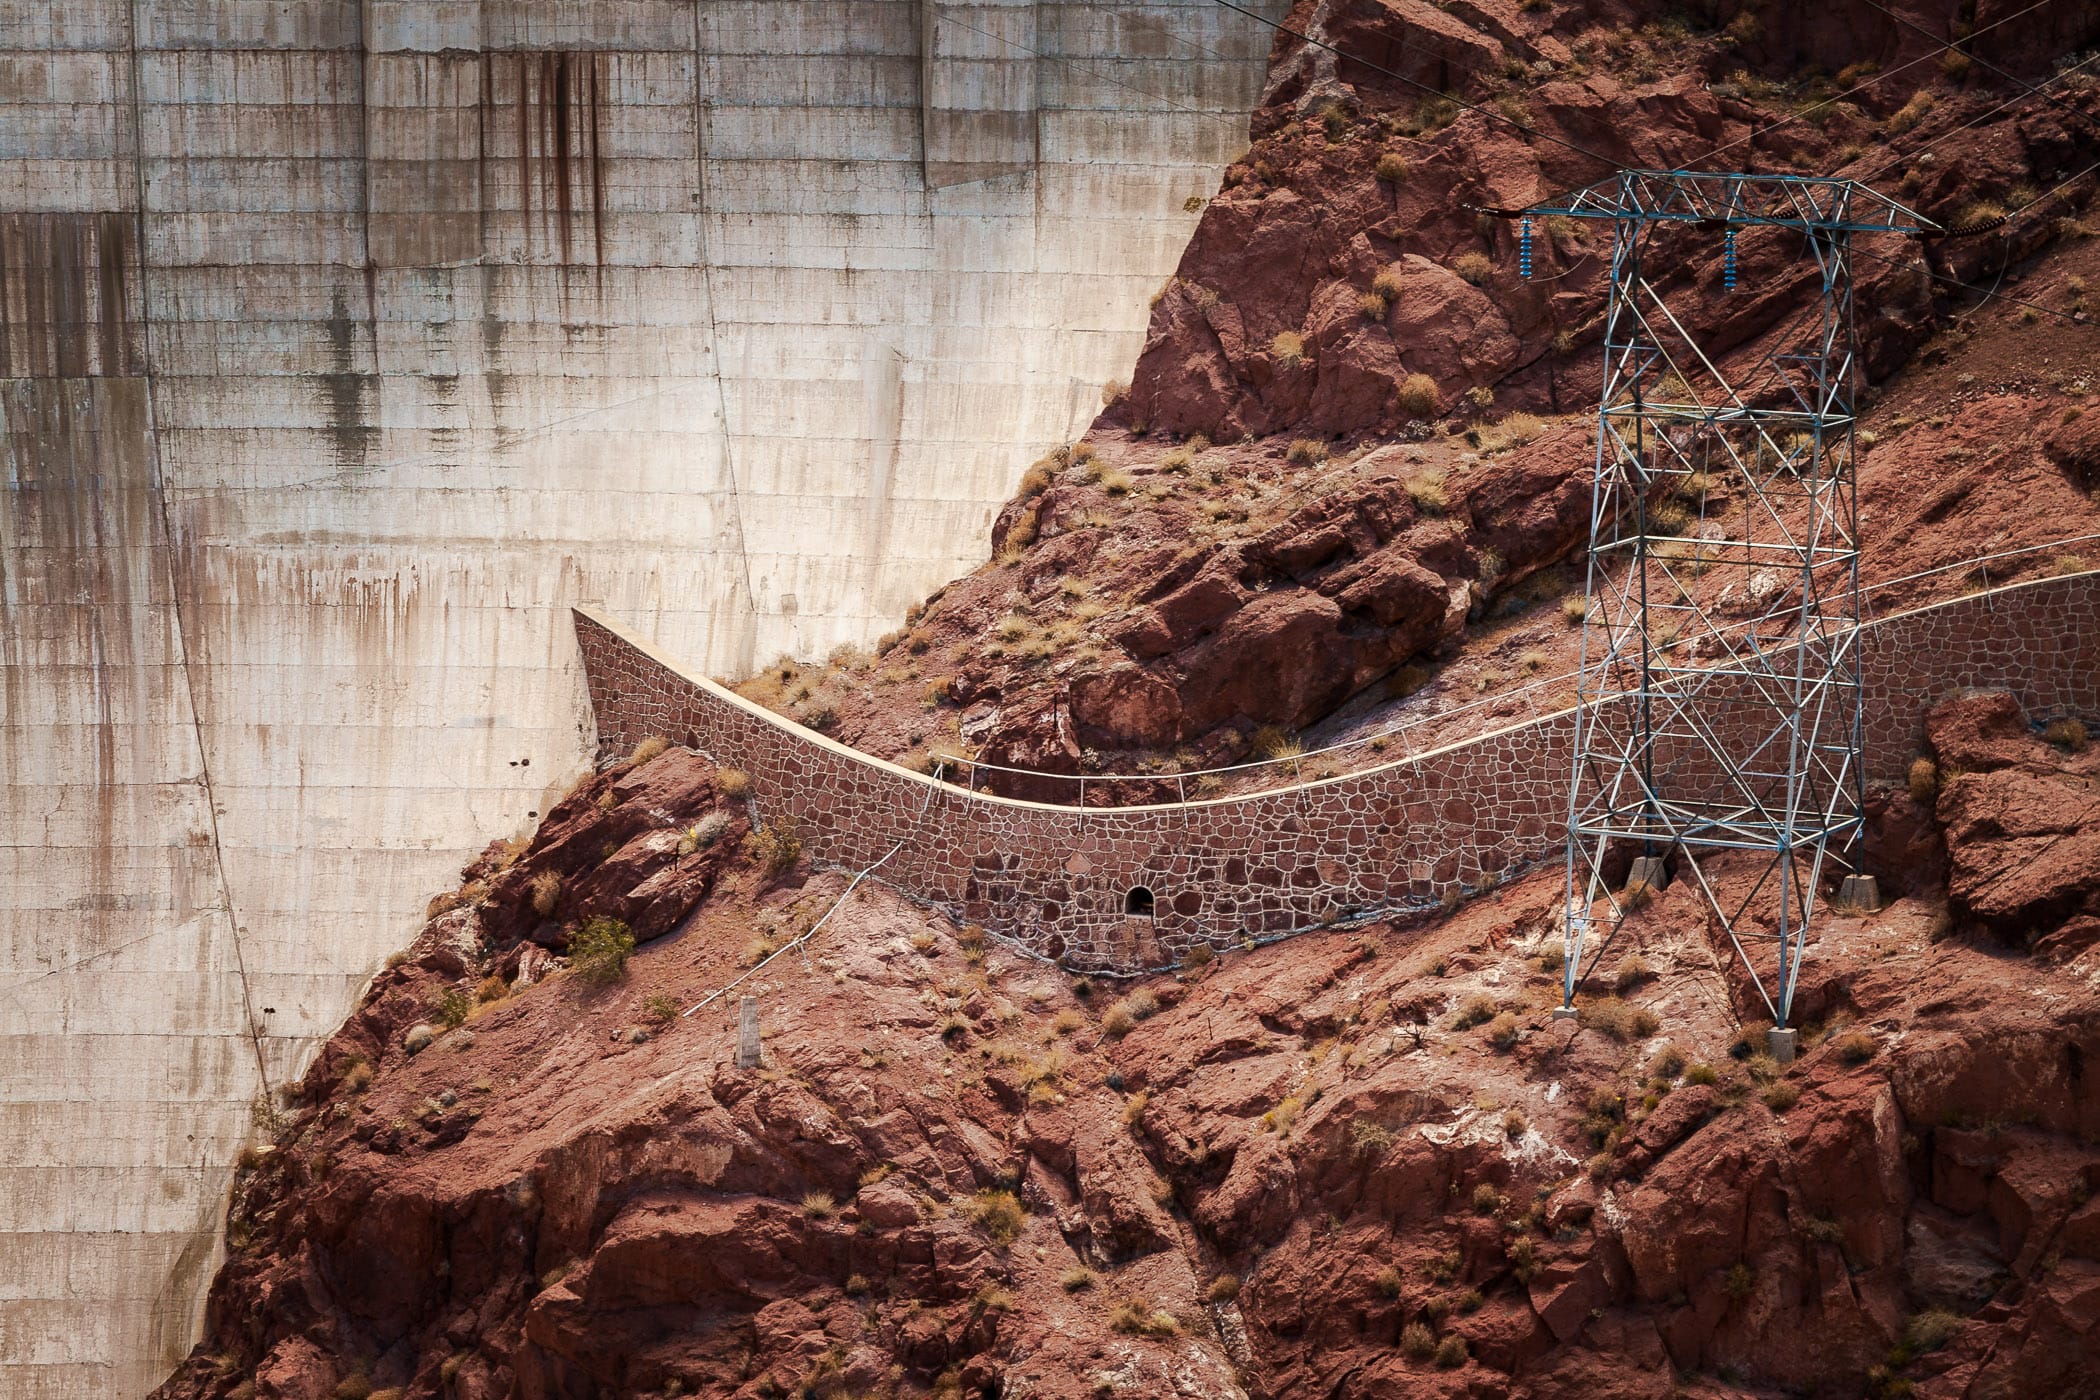 A rock retaining wall and electrical tower next to downstream face of Hoover Dam.